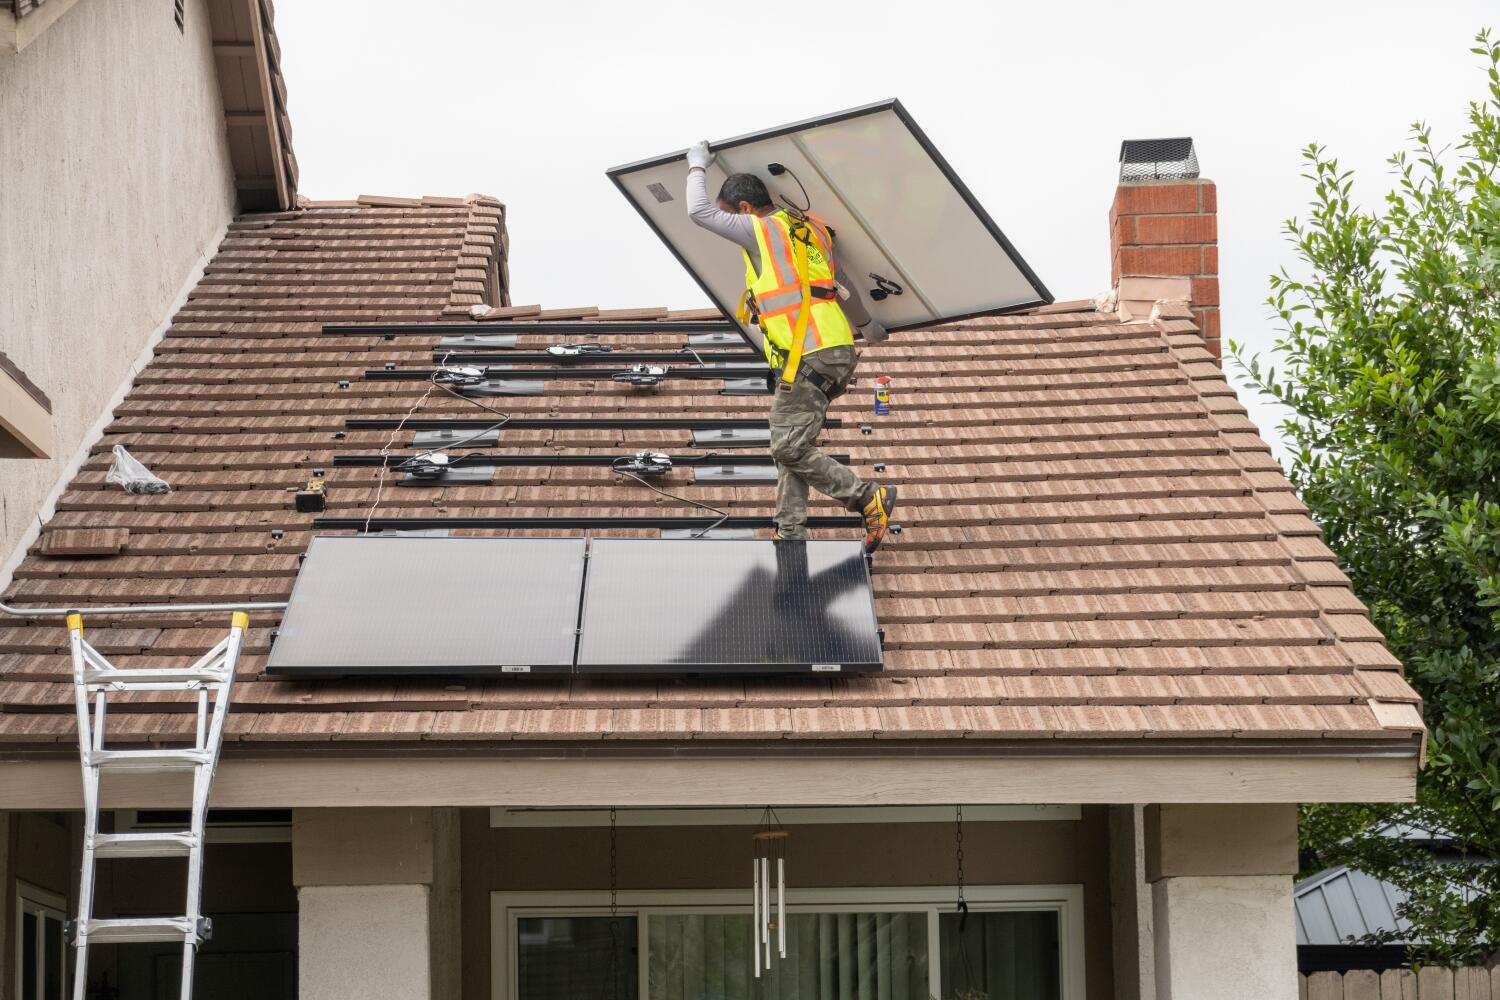 Editorial: Solar installations are plummeting and California regulators are to blame